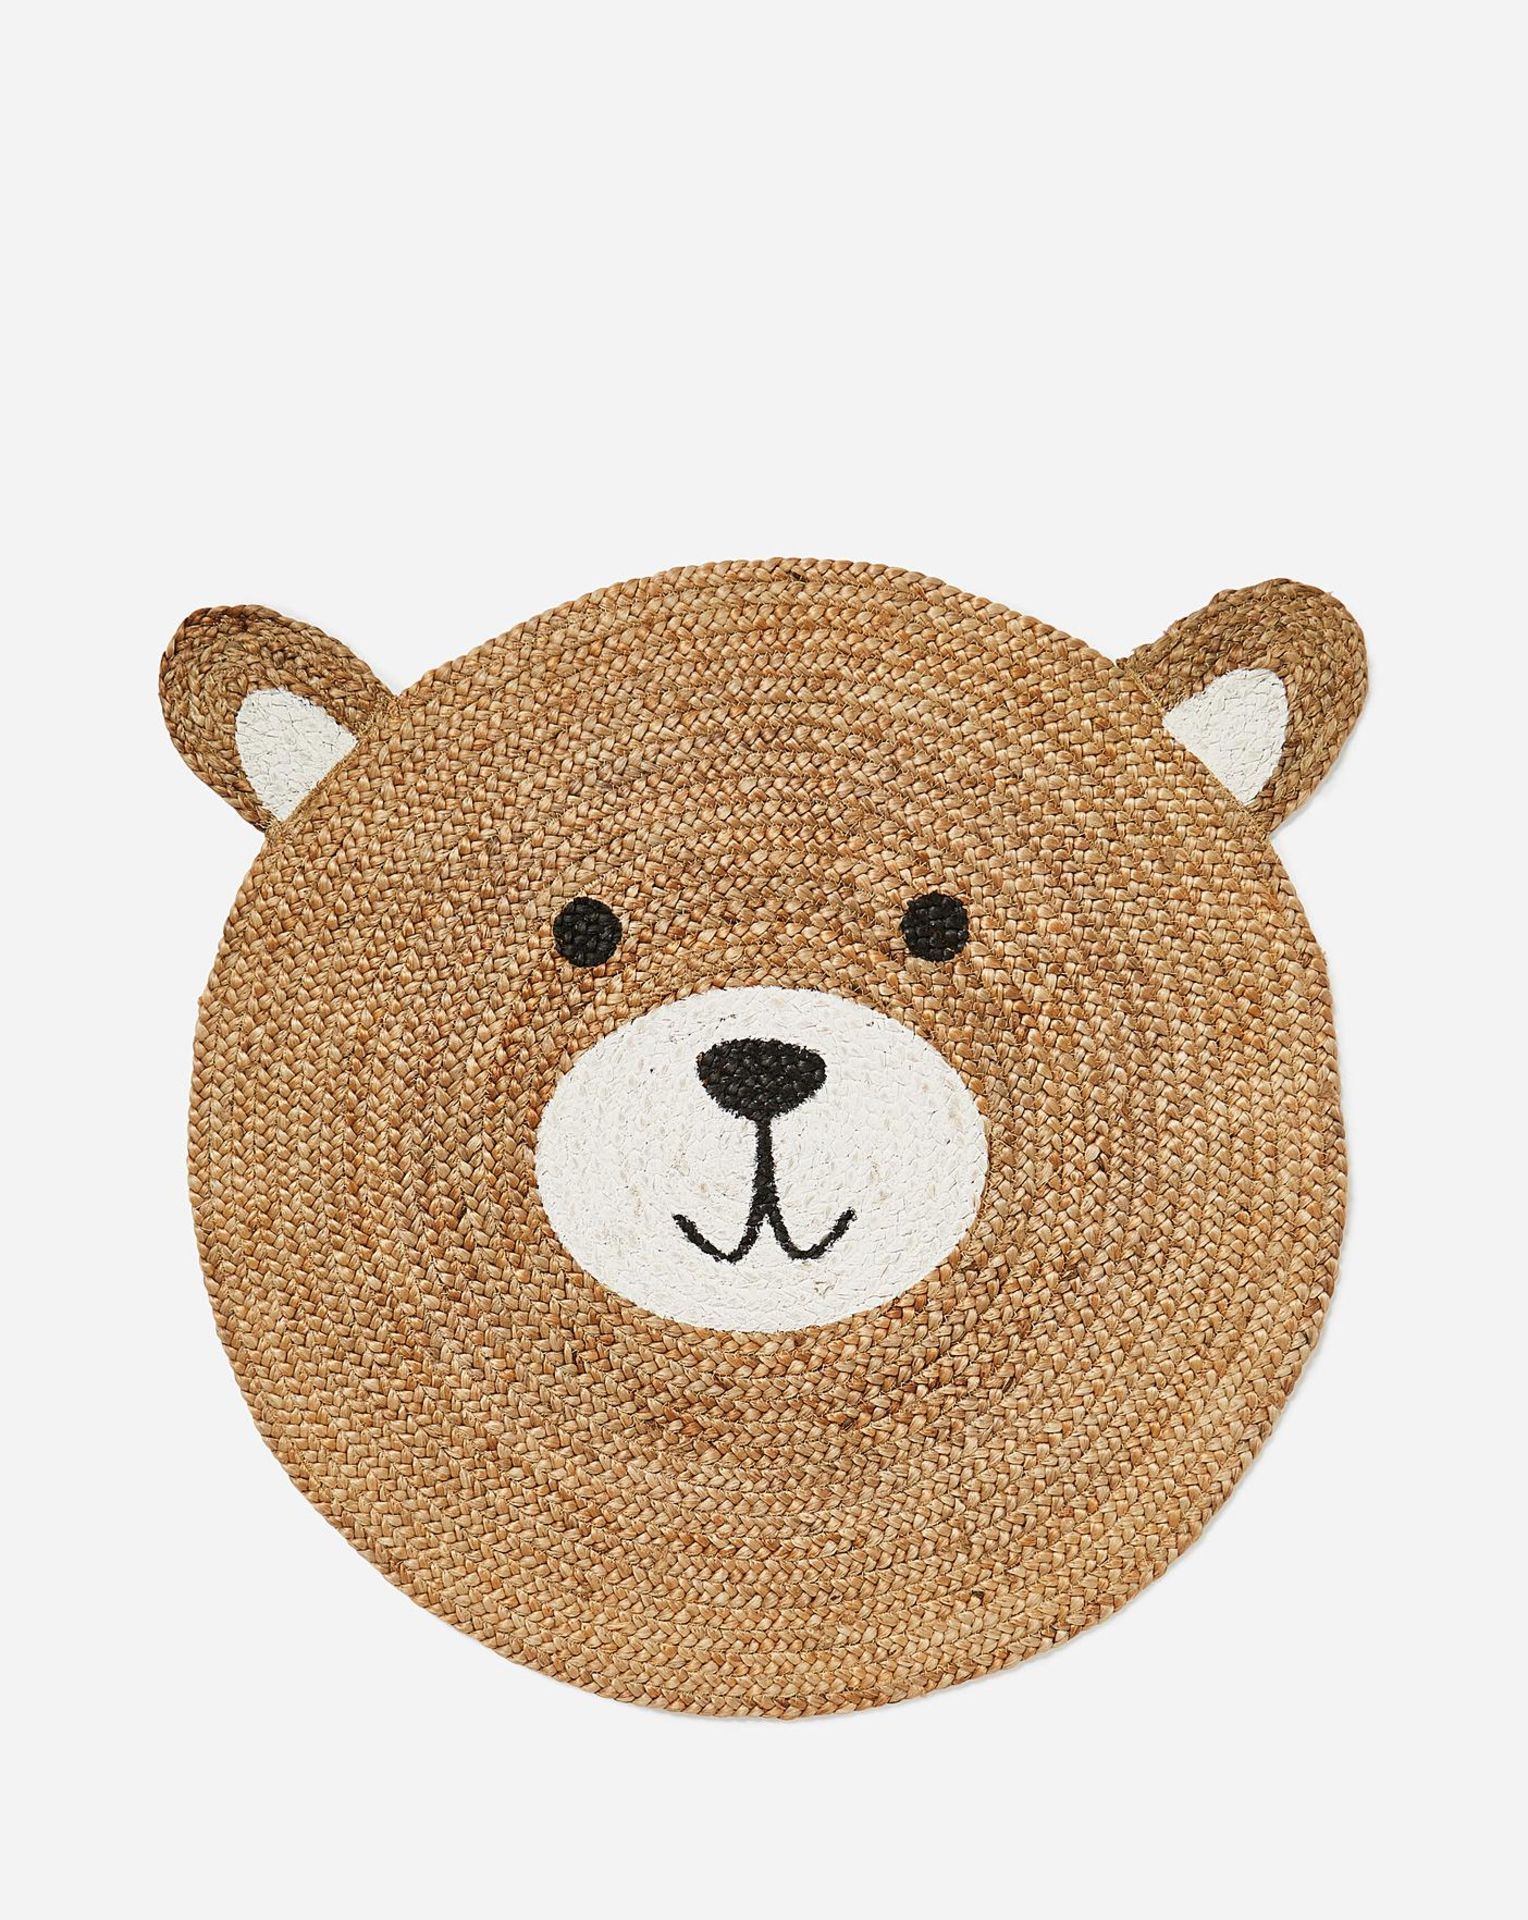 2x BRAND NEW Bear Rug. RRP £88 EACH. Bring light to your little one's bedroom with this Bear Rug. - Image 3 of 3